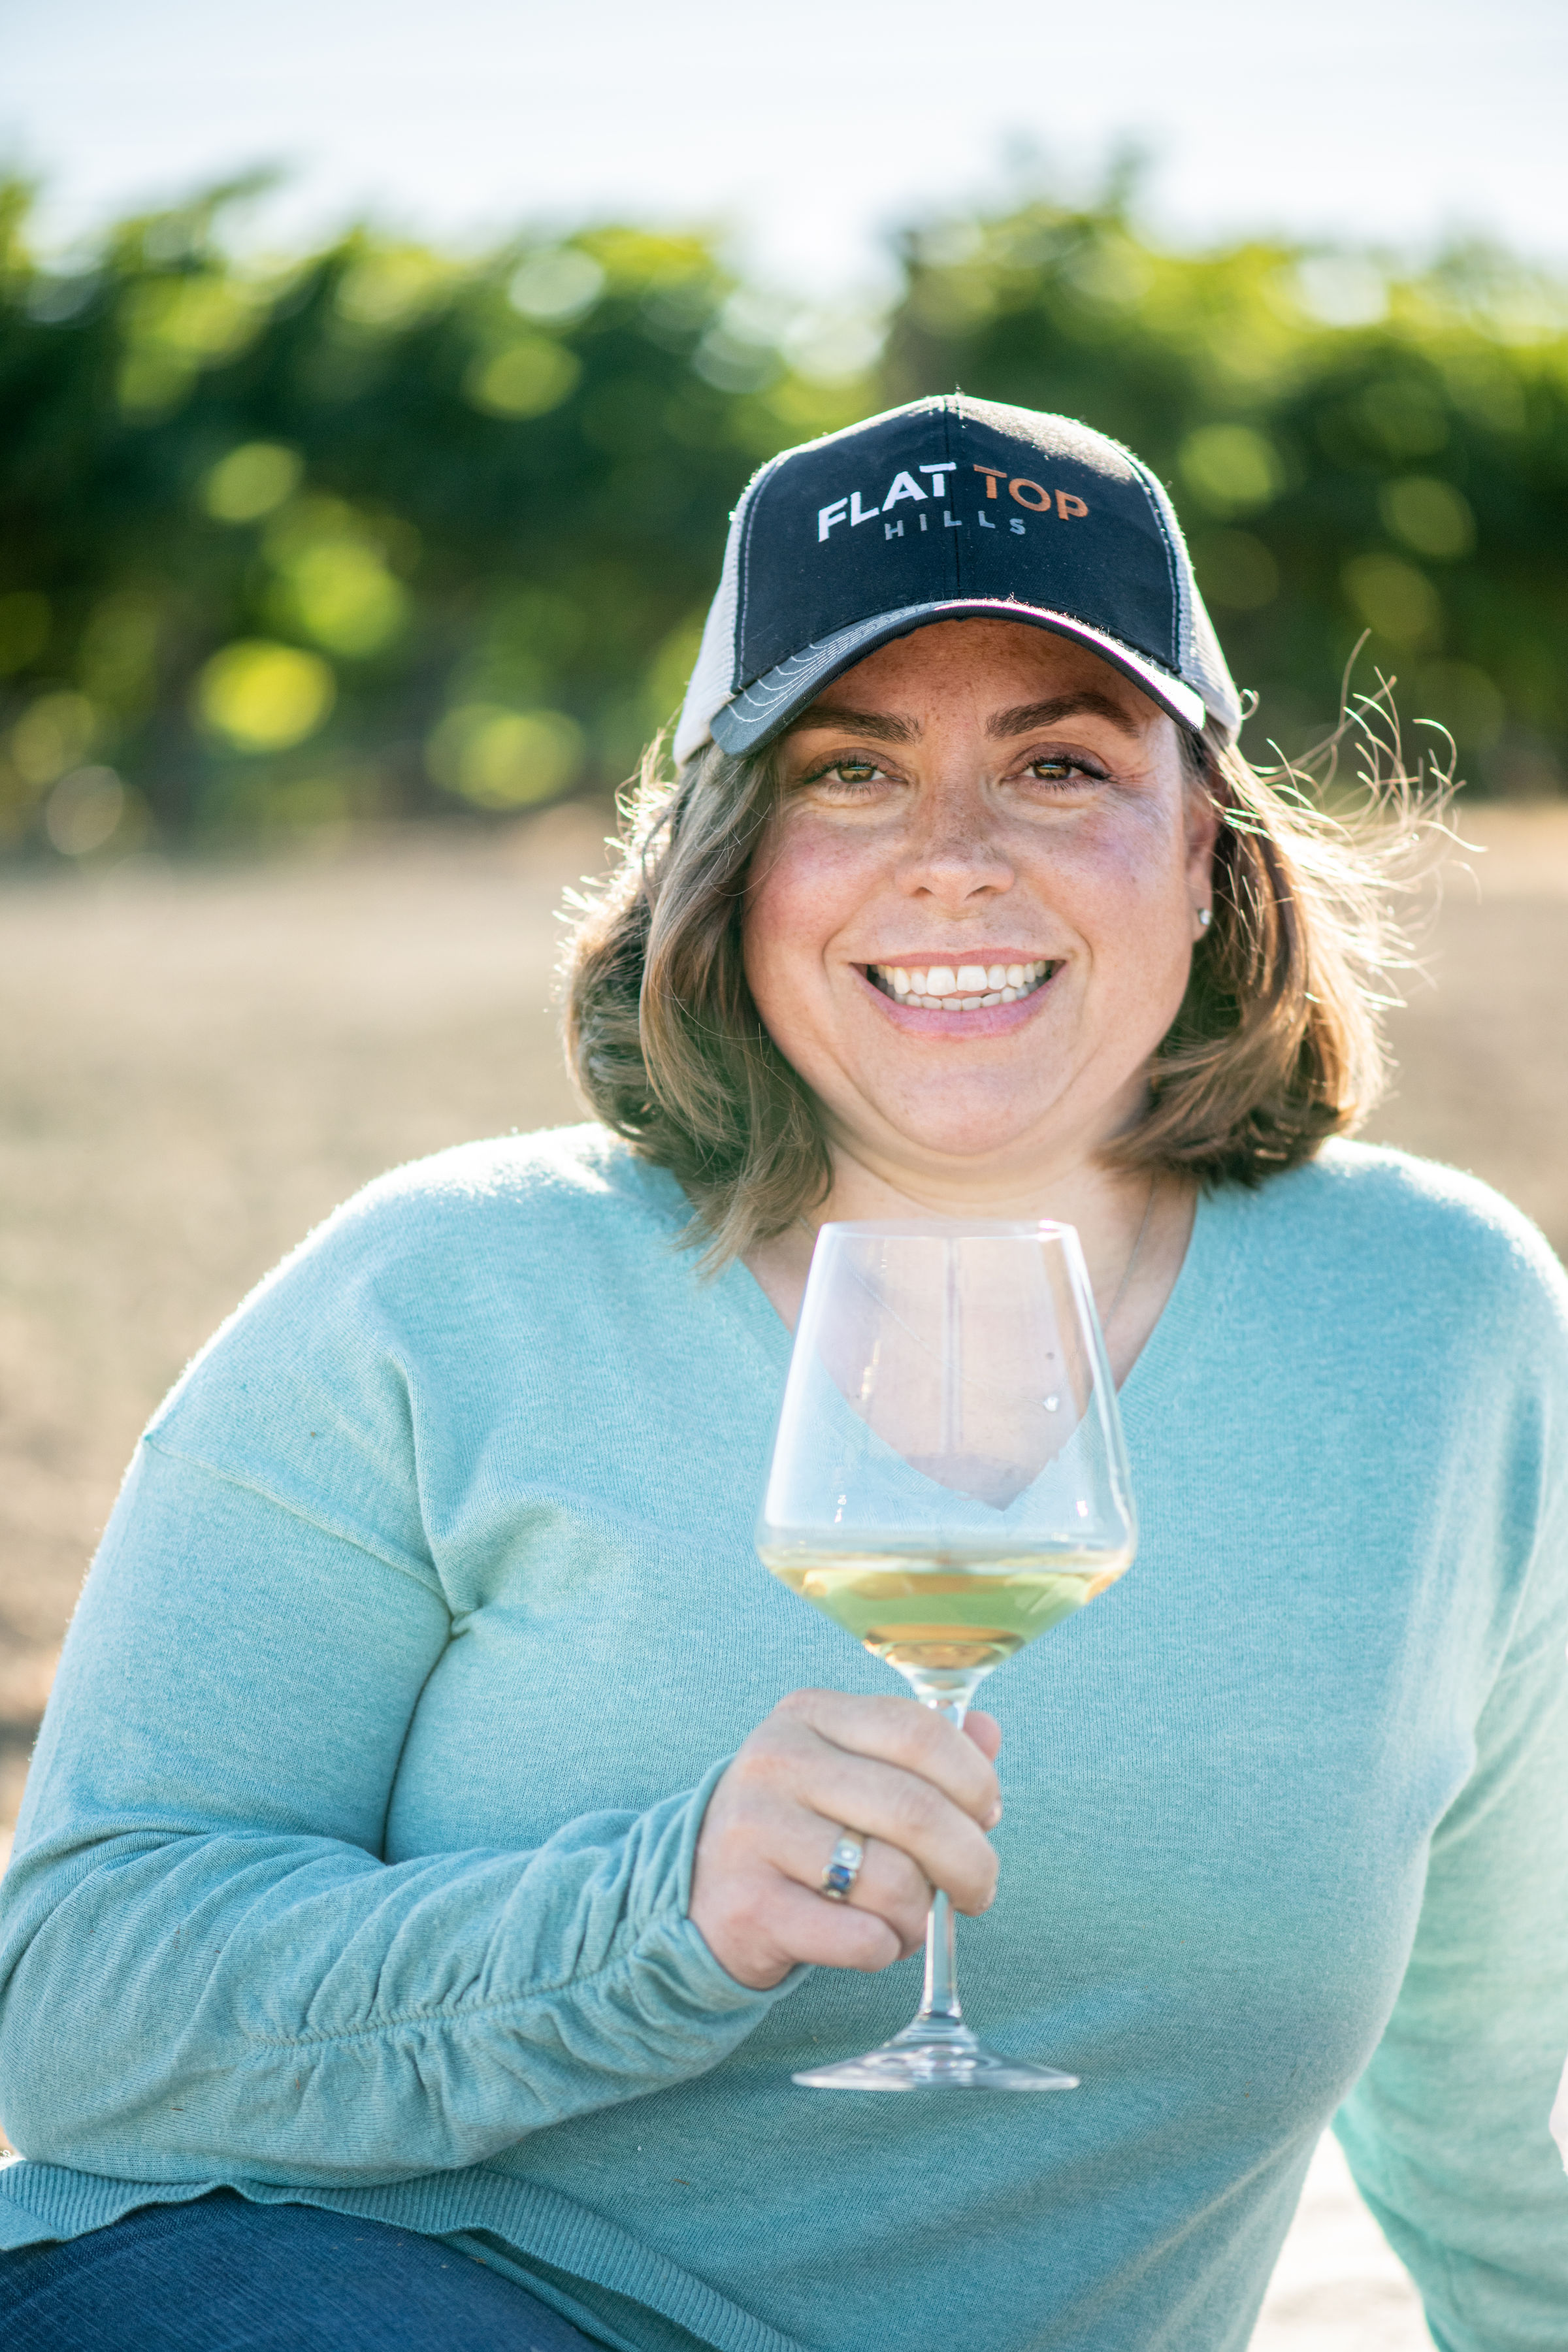 Angelina Mondavi is the consulting winemaker for Flat Top Hills and a member of the fourth generation of the C. Mondavi family.